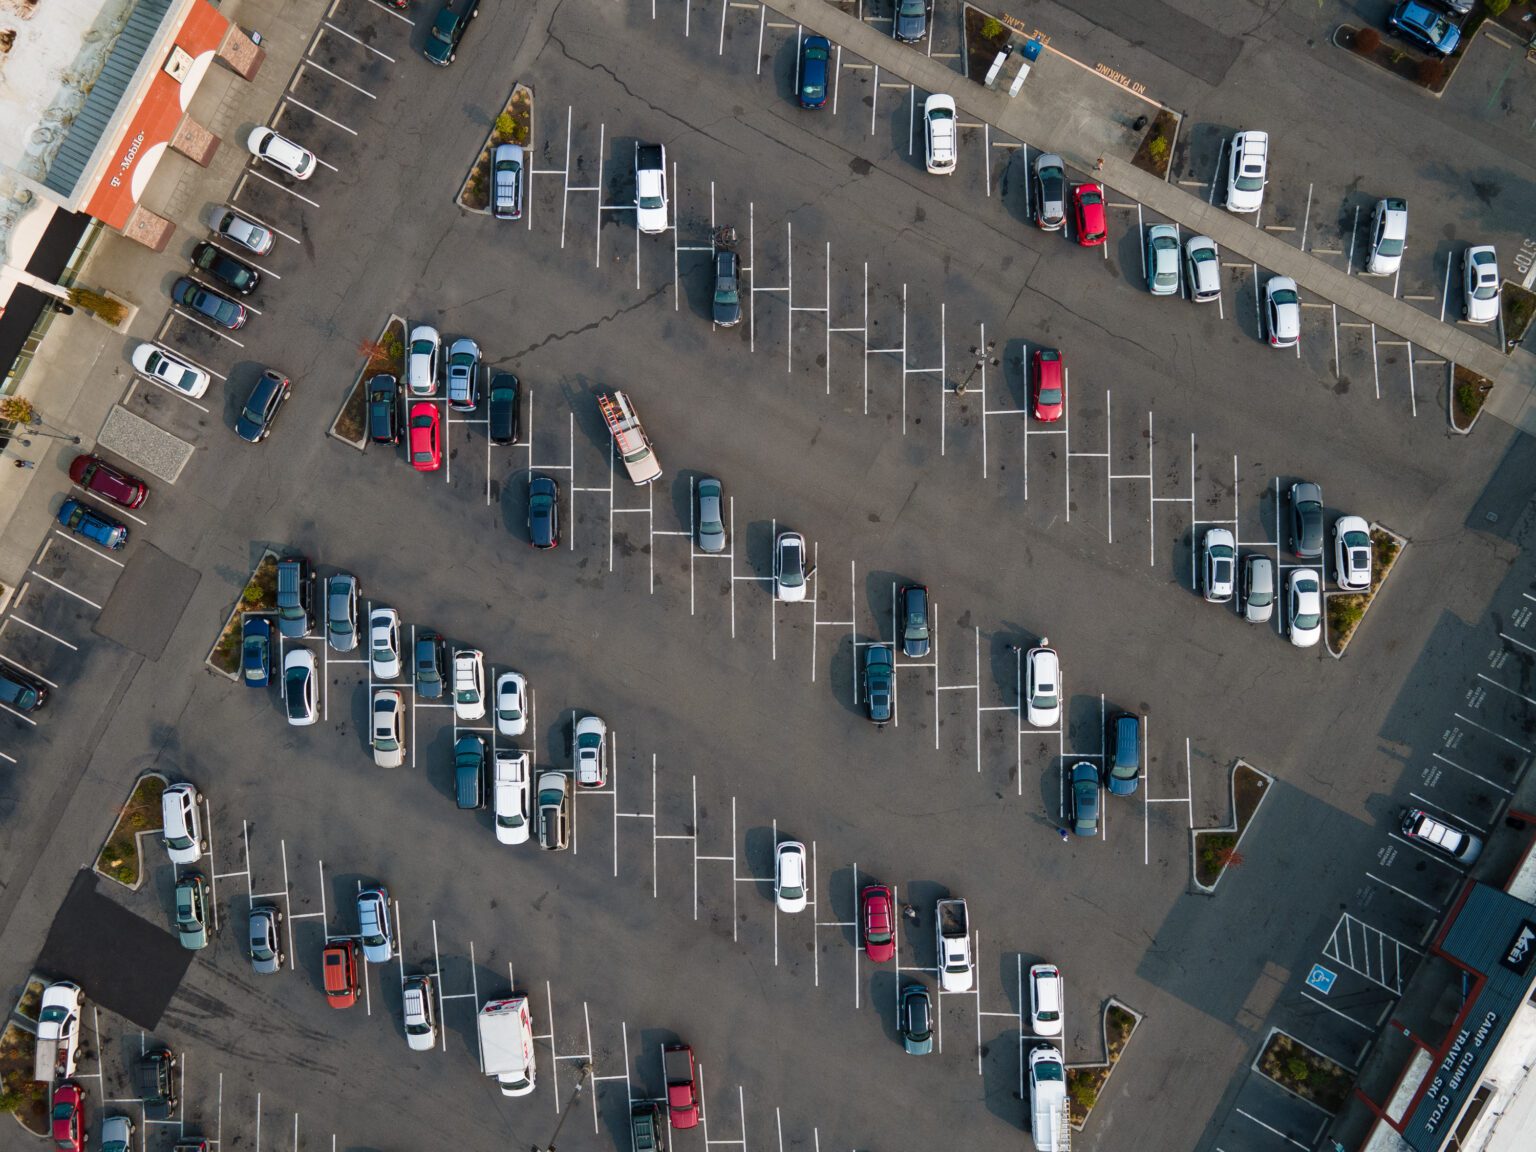 Cars fill the lot of the strip mall in Sehome on Oct. 18. Parking requirements for new developments are hindering growth of housing and having negative impacts on the environment